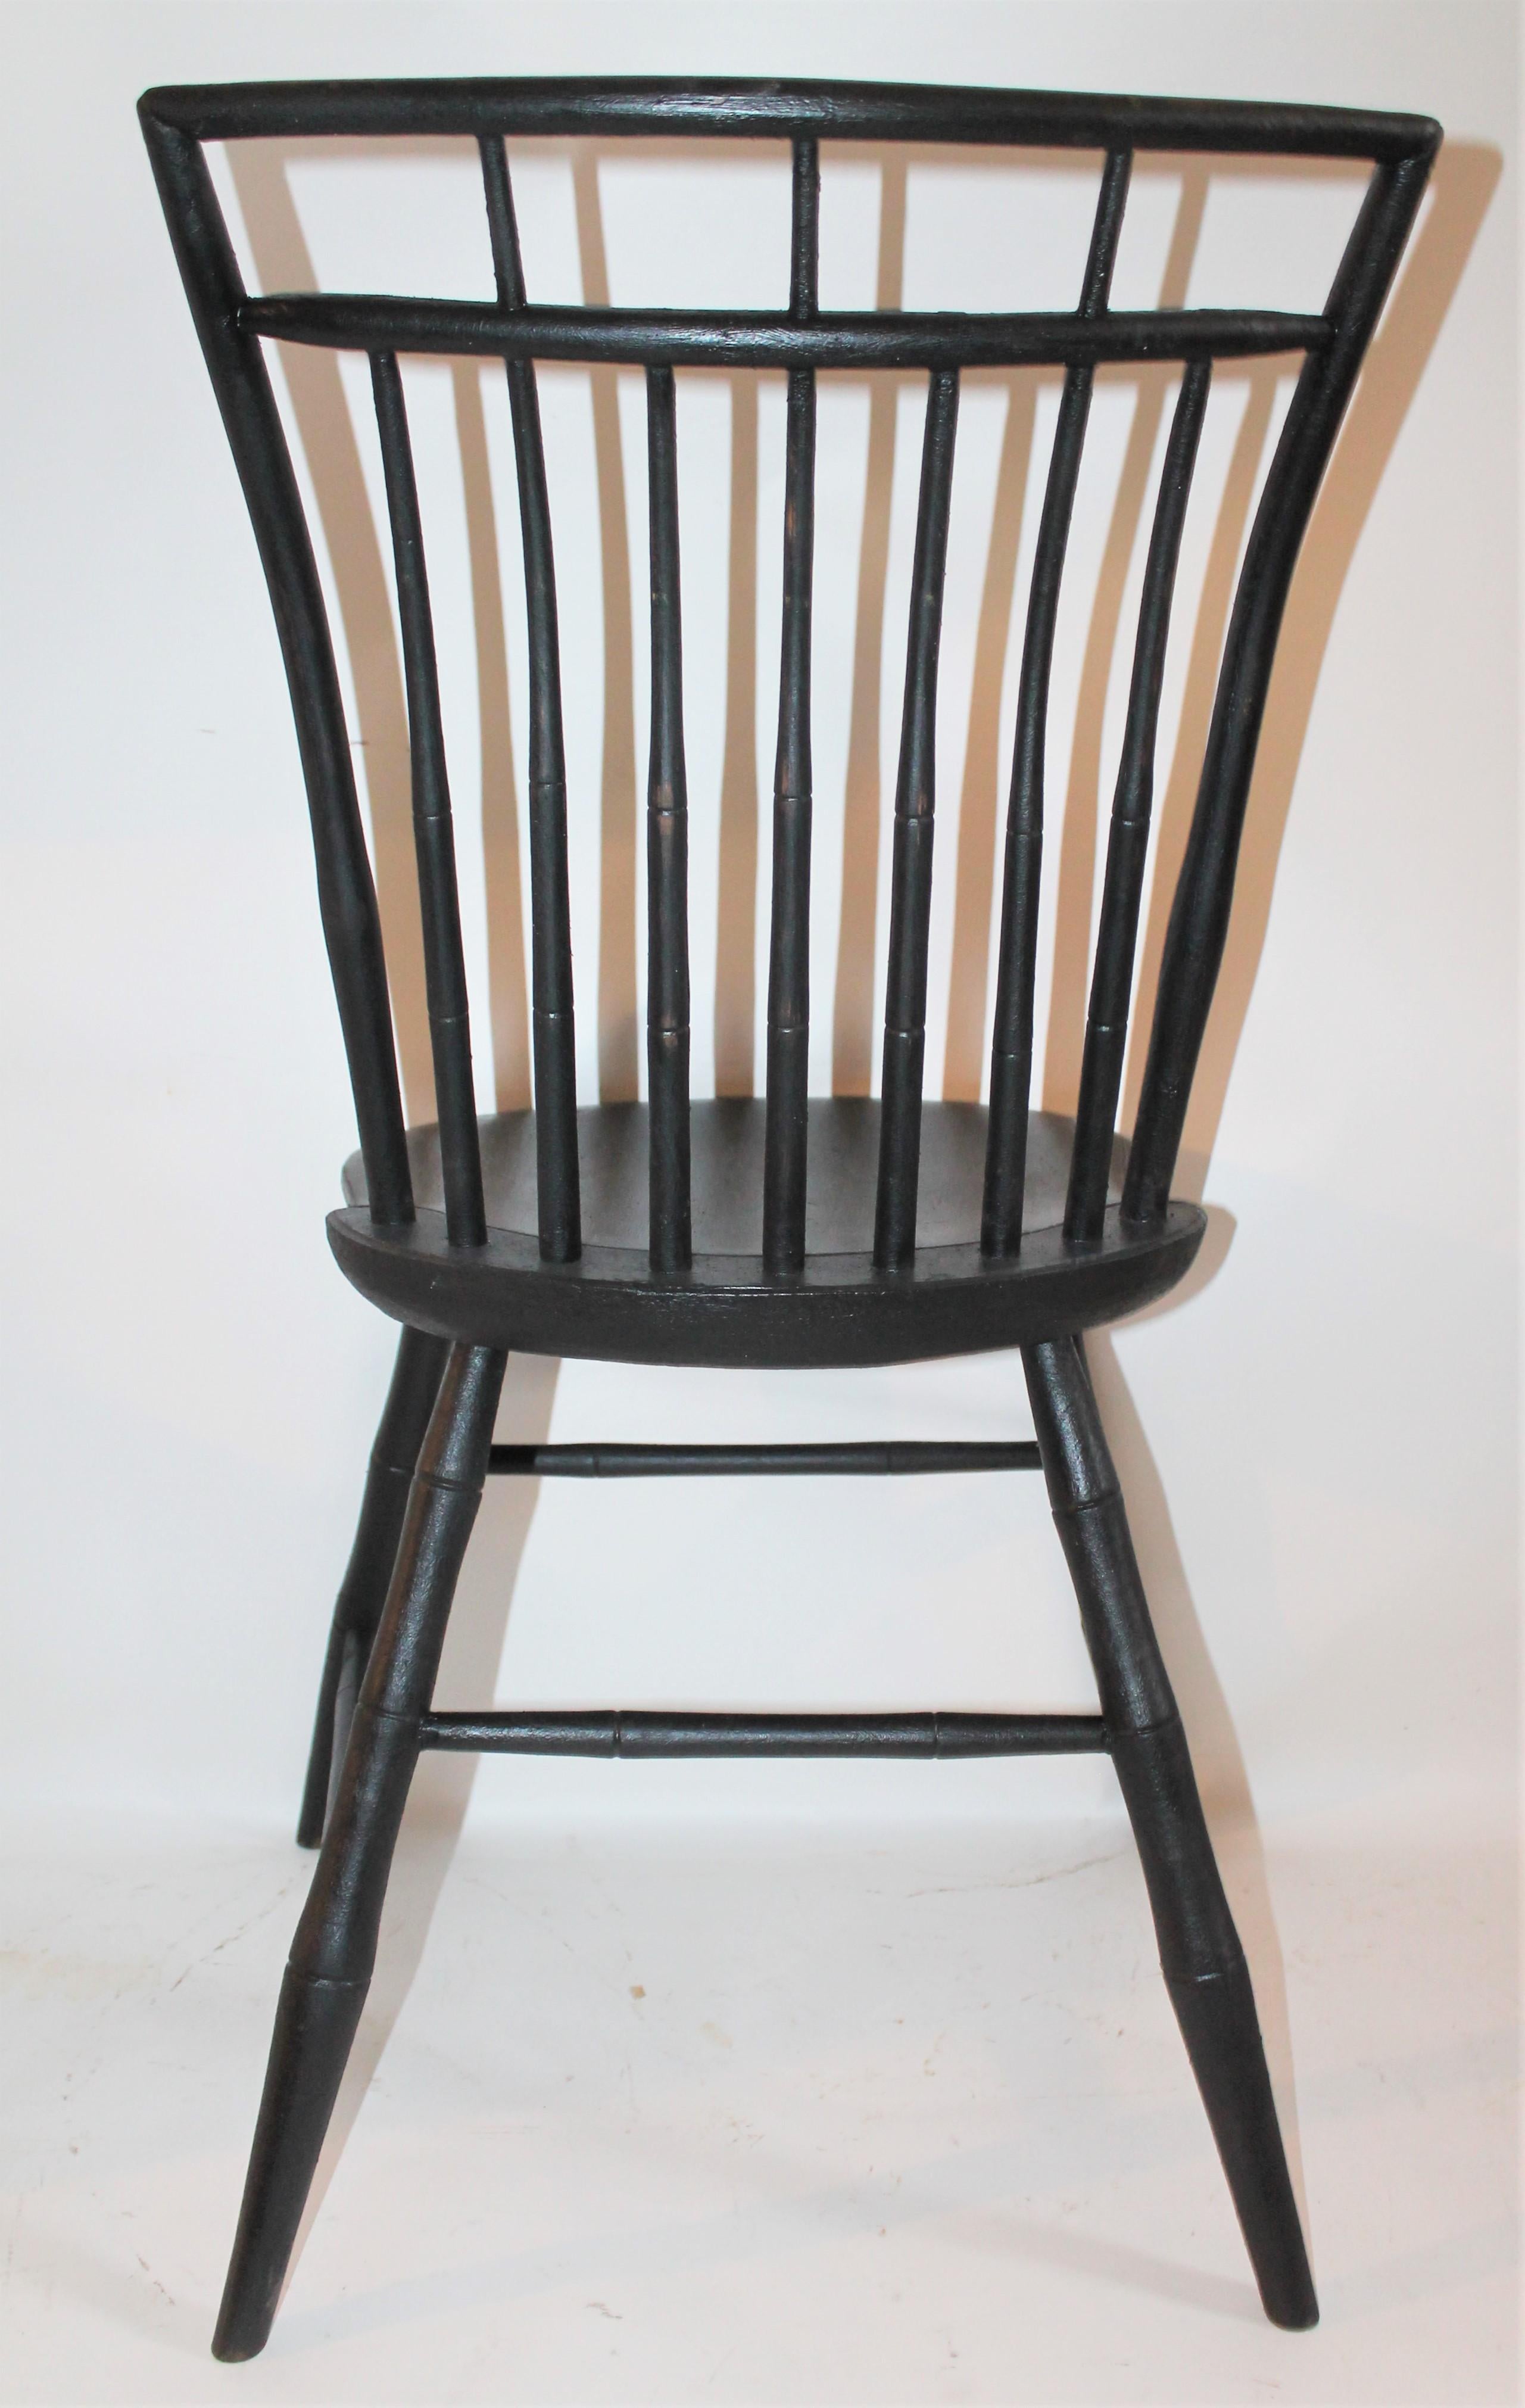 American 19th Century Windsor Chairs in Black Painted Surface, Pair